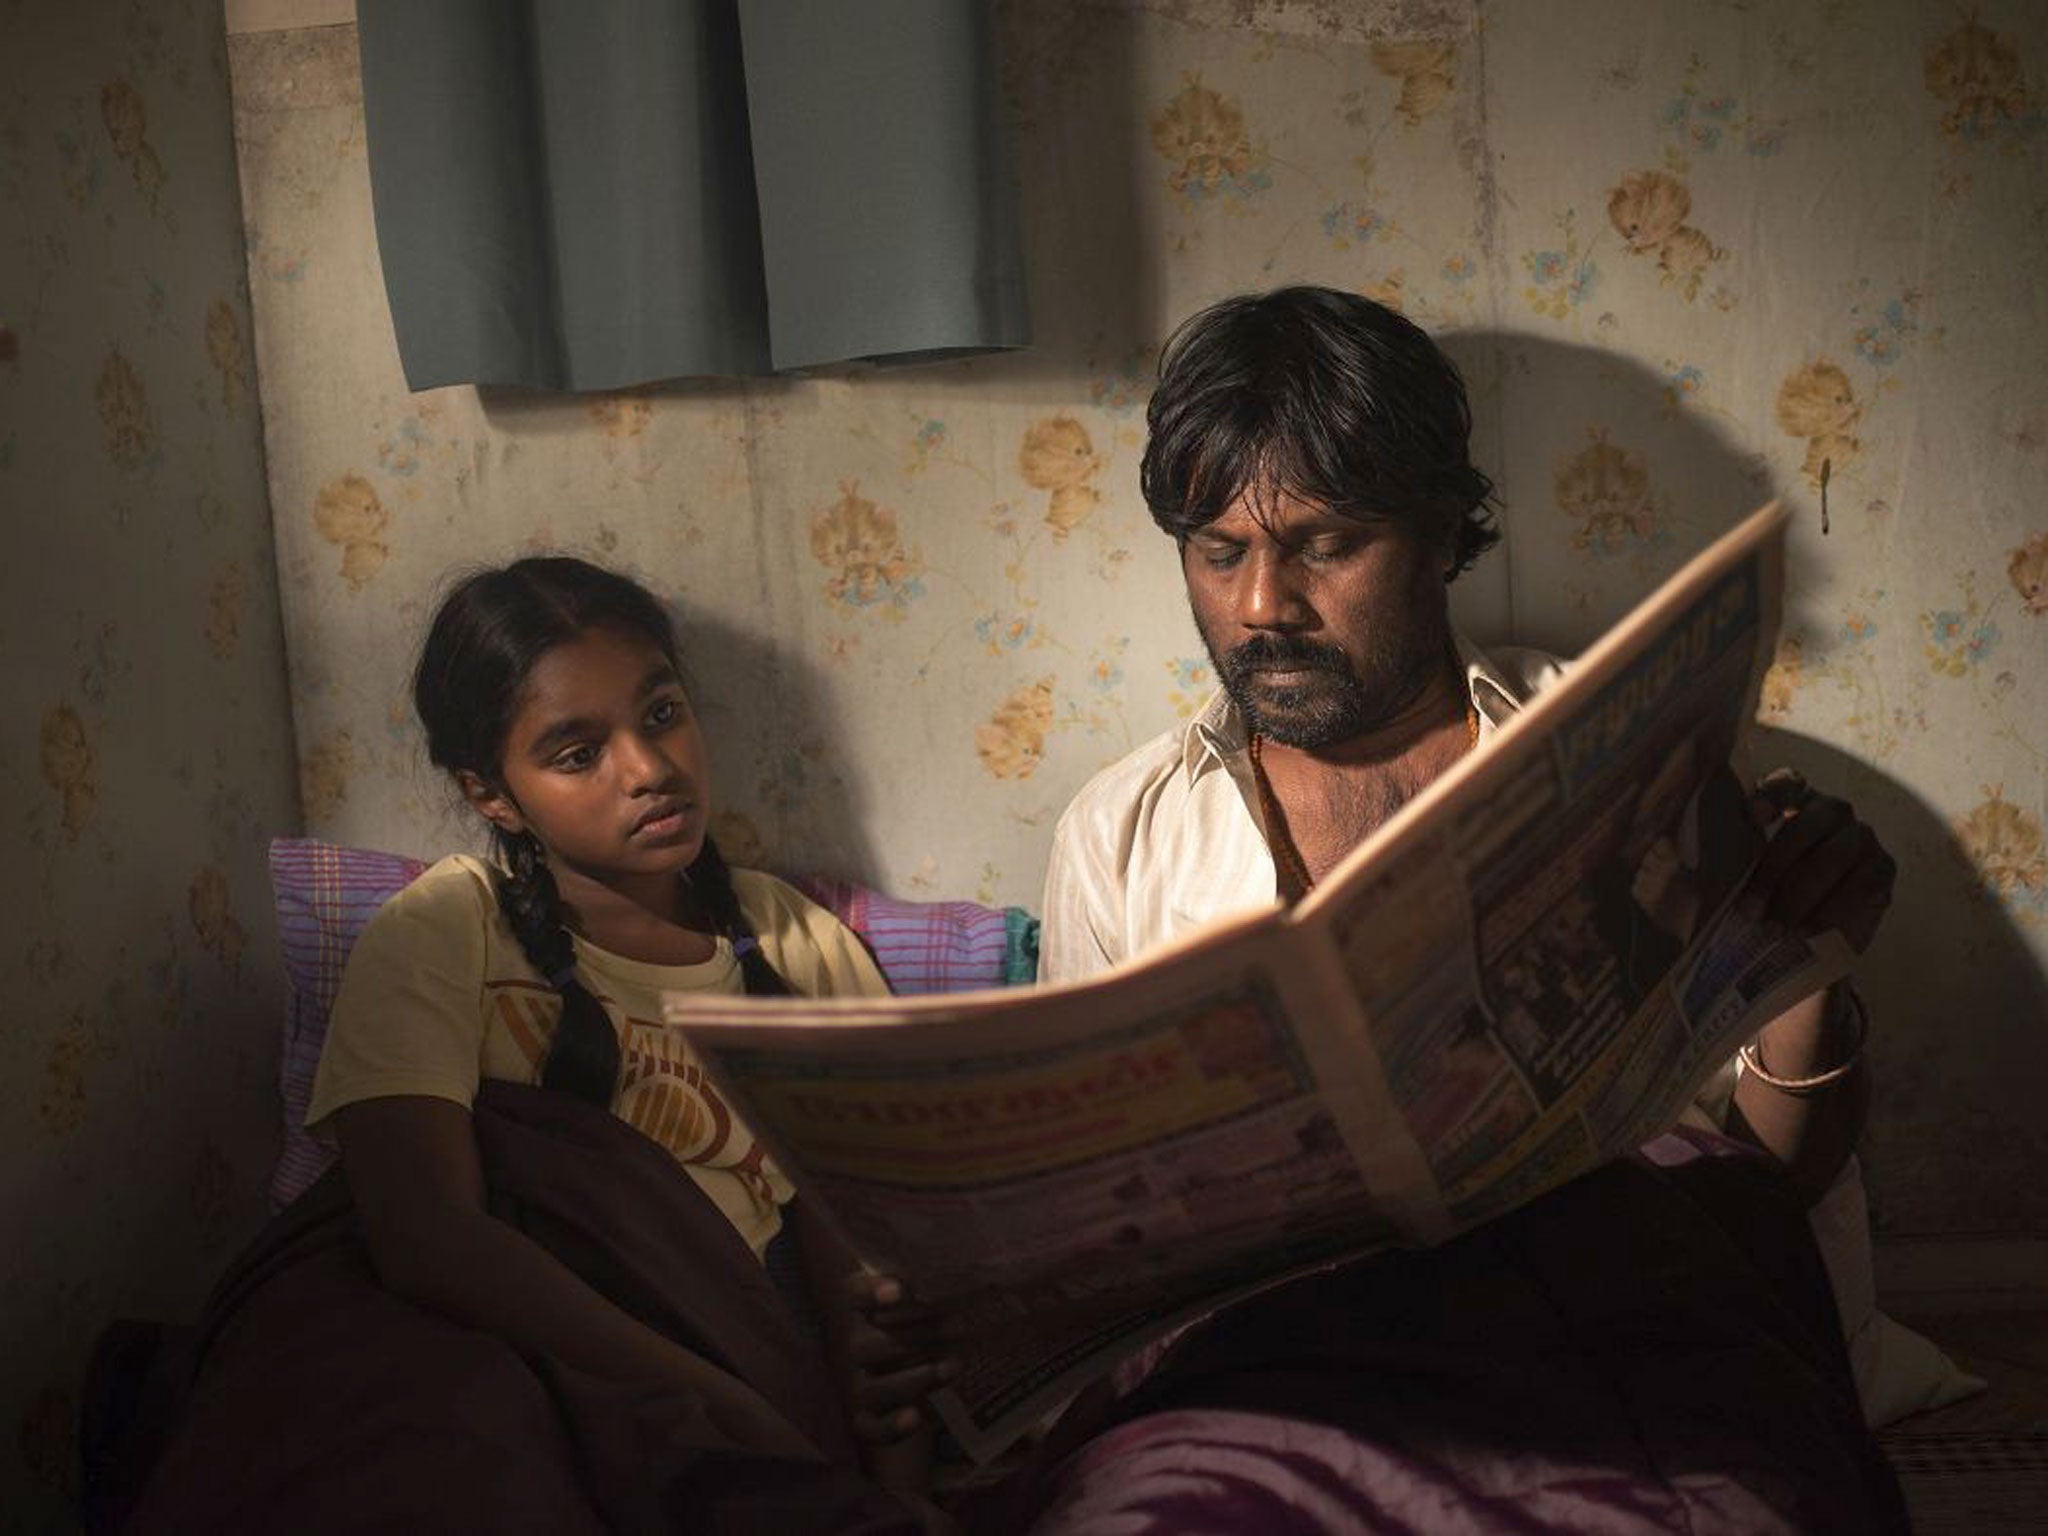 Cannes 2015 news: Film in Tamil and French wins big - Asian